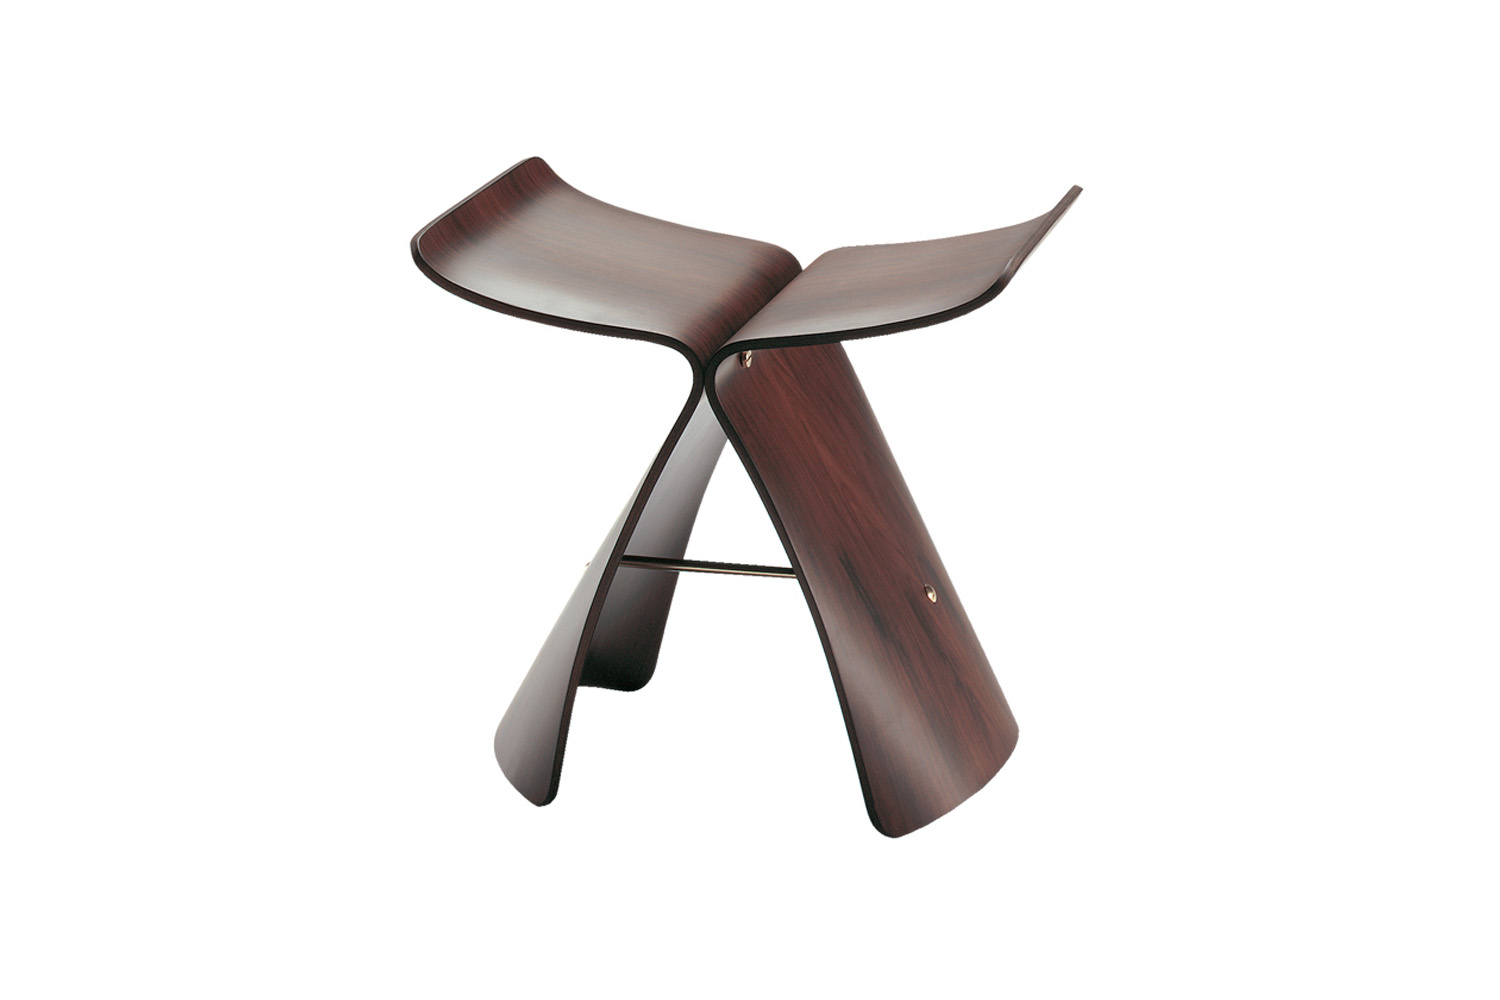 the sori yanagi butterfly stool in palisander wood is $990 at finnish design s 13